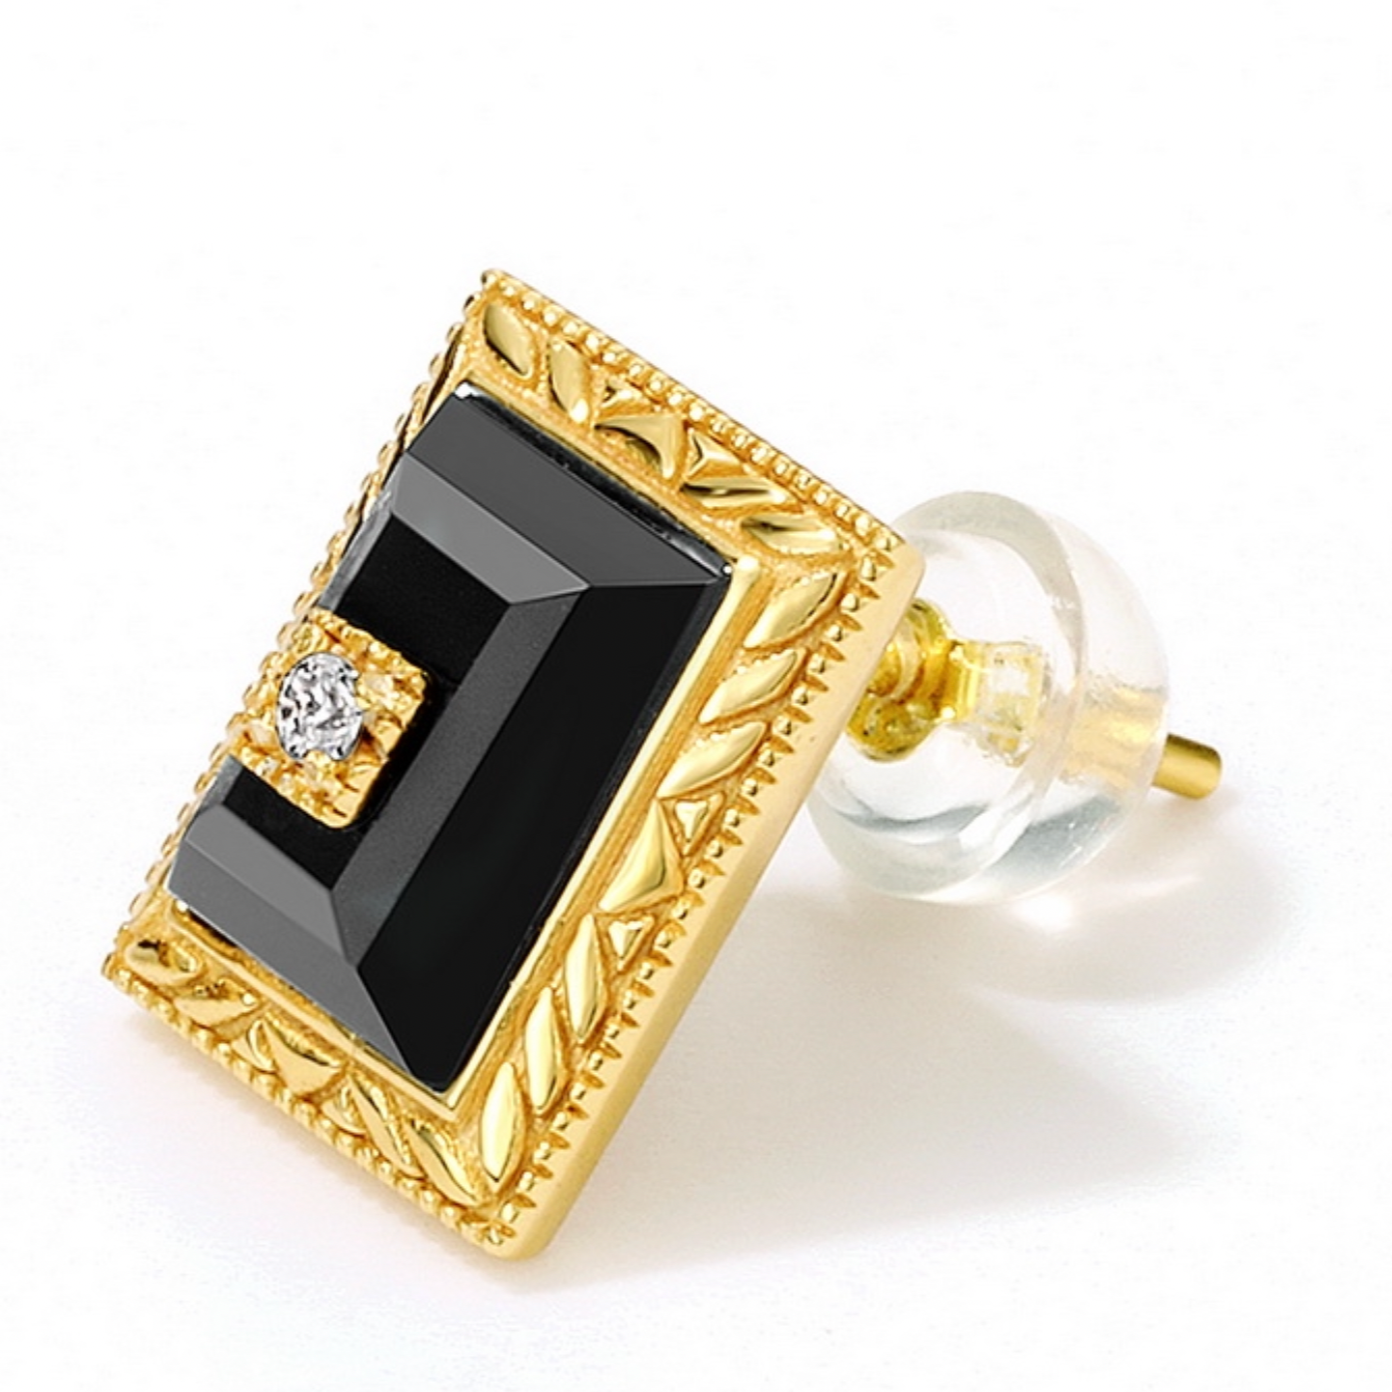 Black and Gold Agate Square Statement Earrings